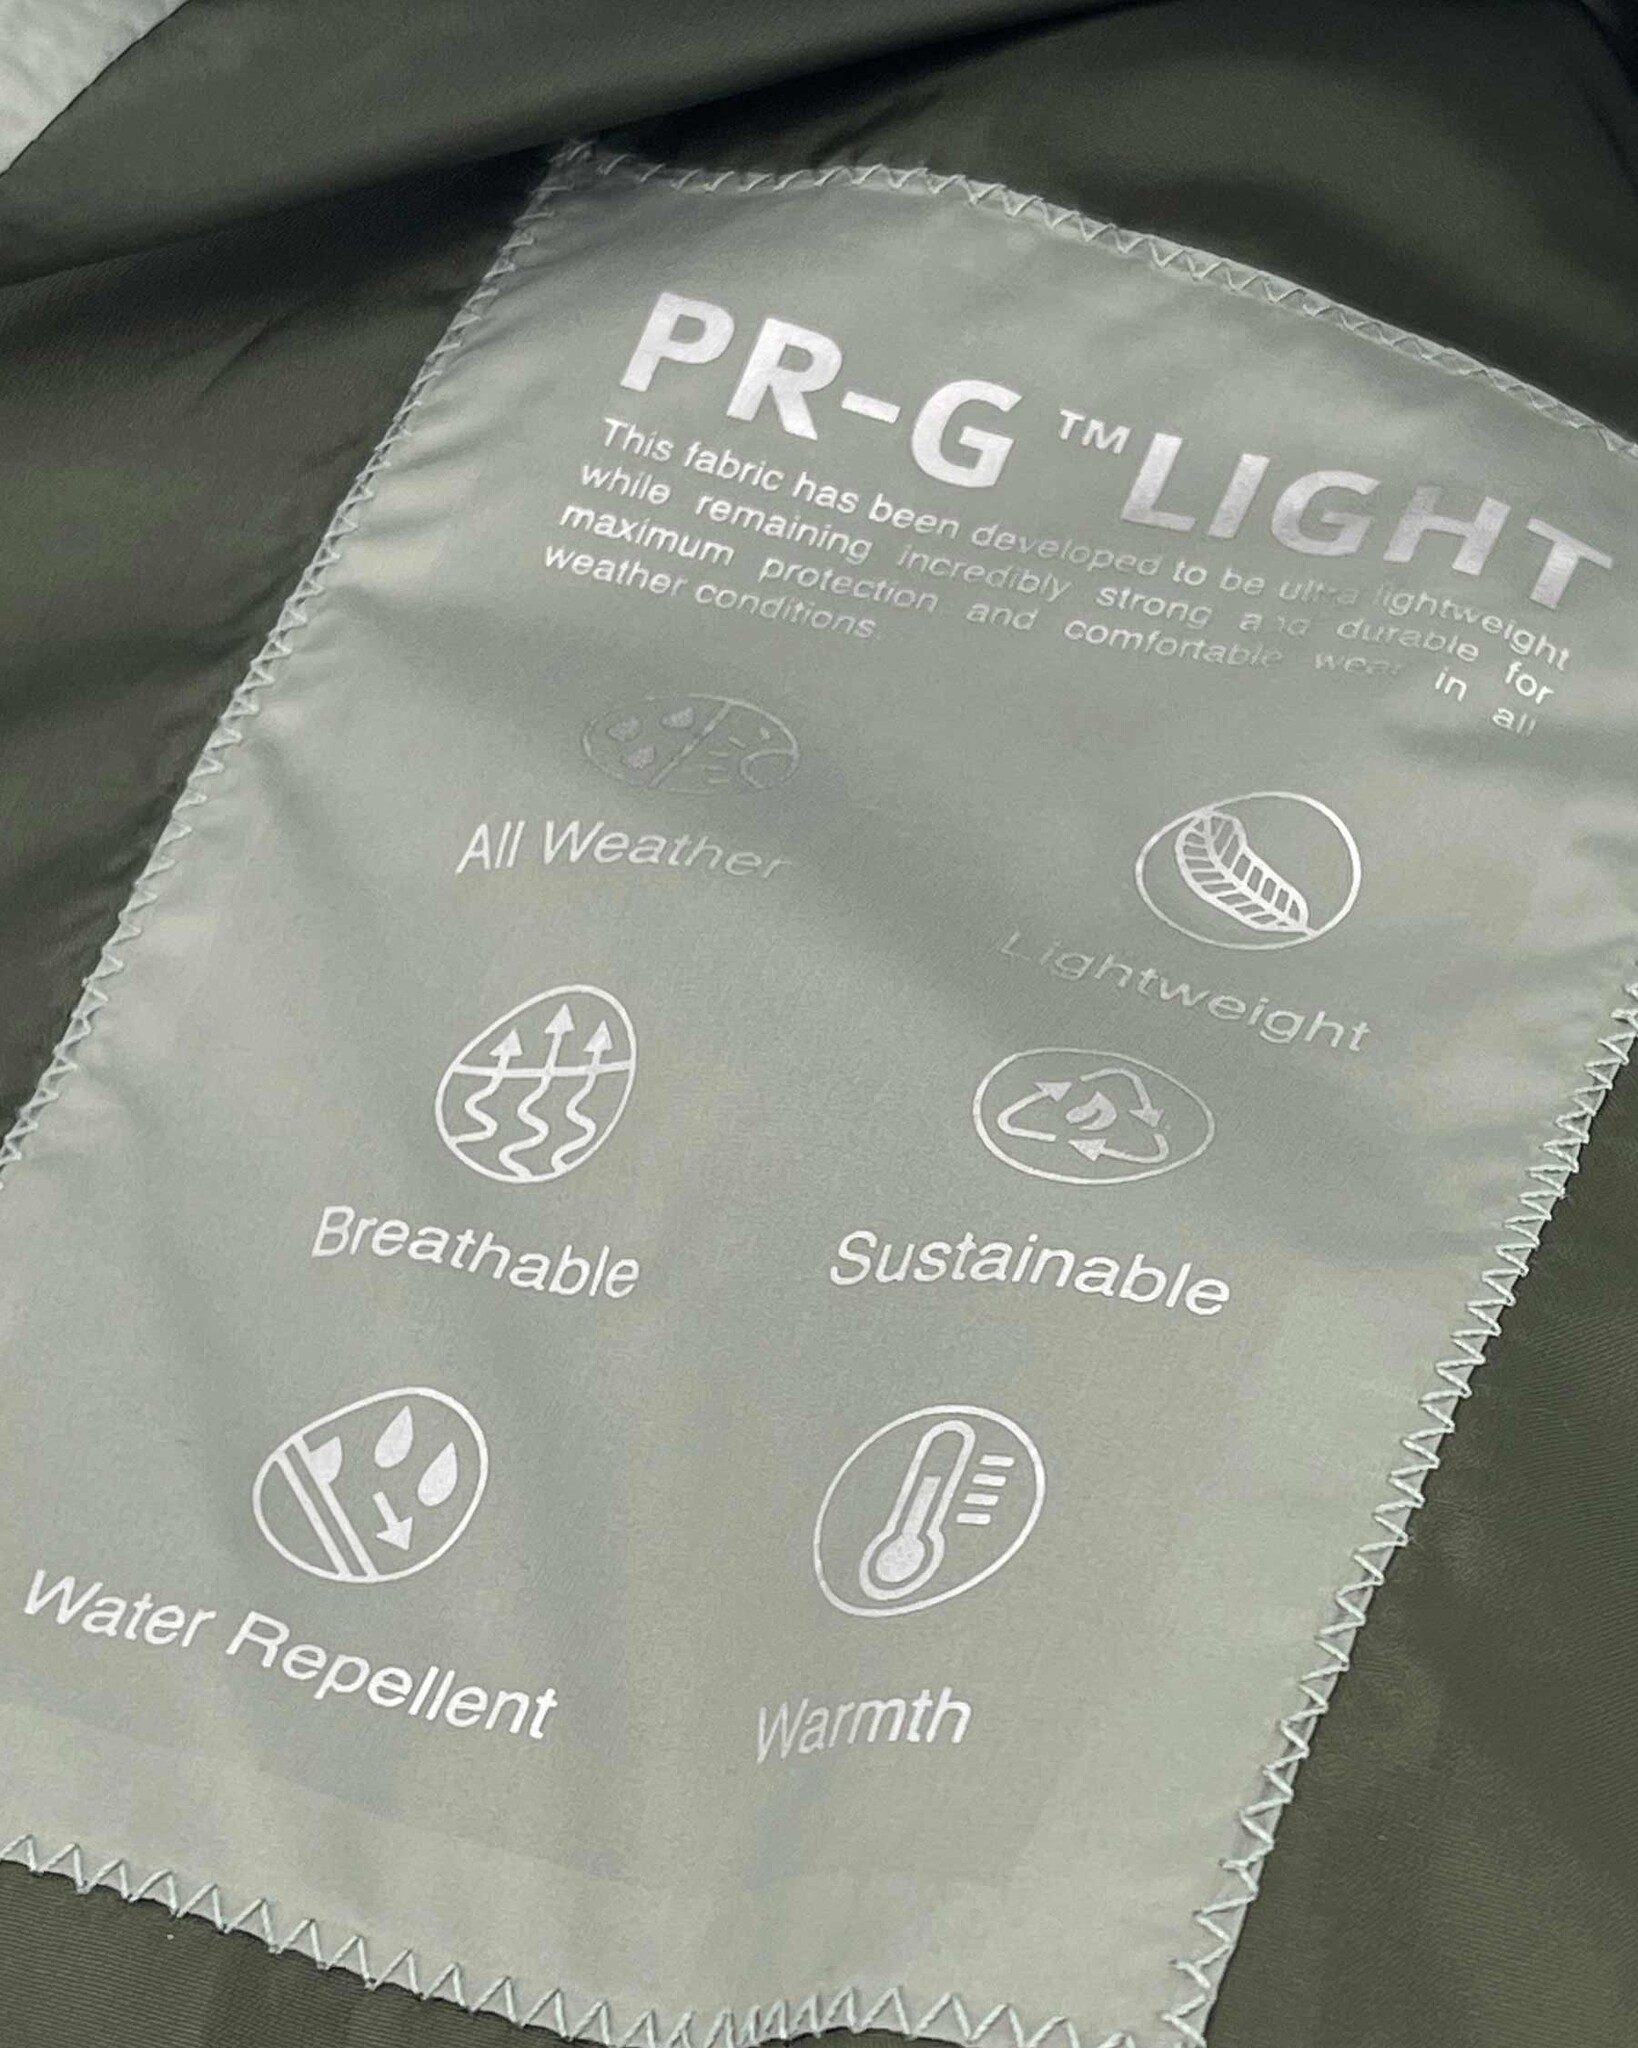 The classic PR-G™ Light quilted bodywarmer